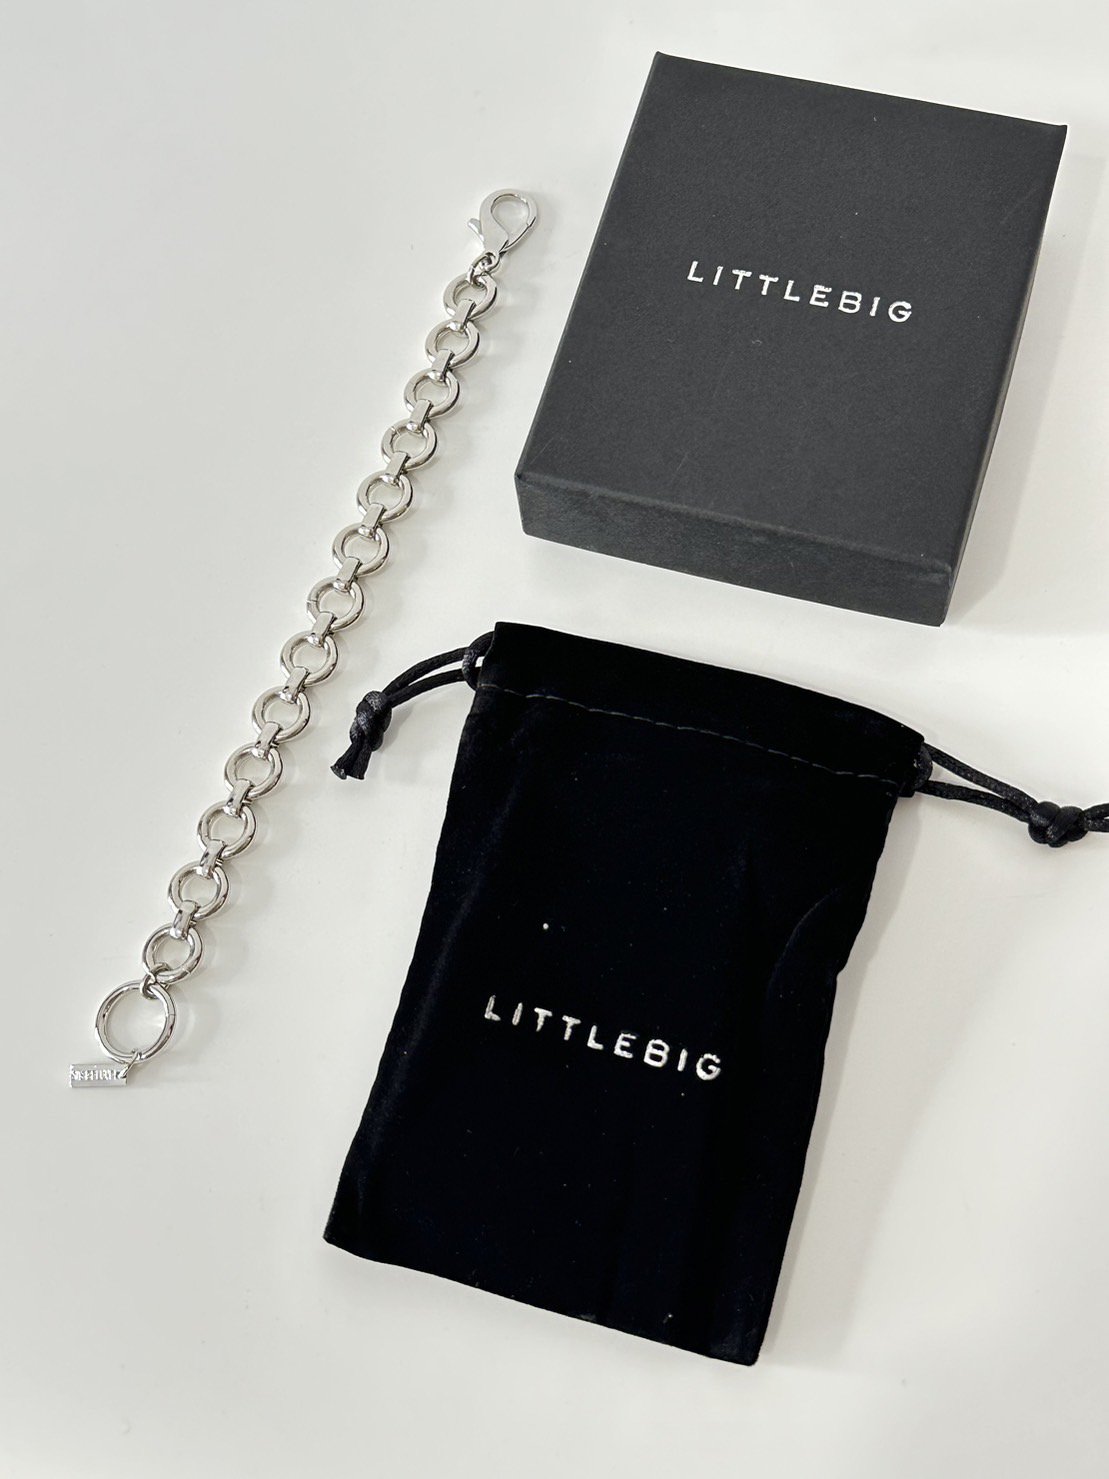 LITTLEBIG<br />Circle Bracelet / Silver<img class='new_mark_img2' src='https://img.shop-pro.jp/img/new/icons14.gif' style='border:none;display:inline;margin:0px;padding:0px;width:auto;' />